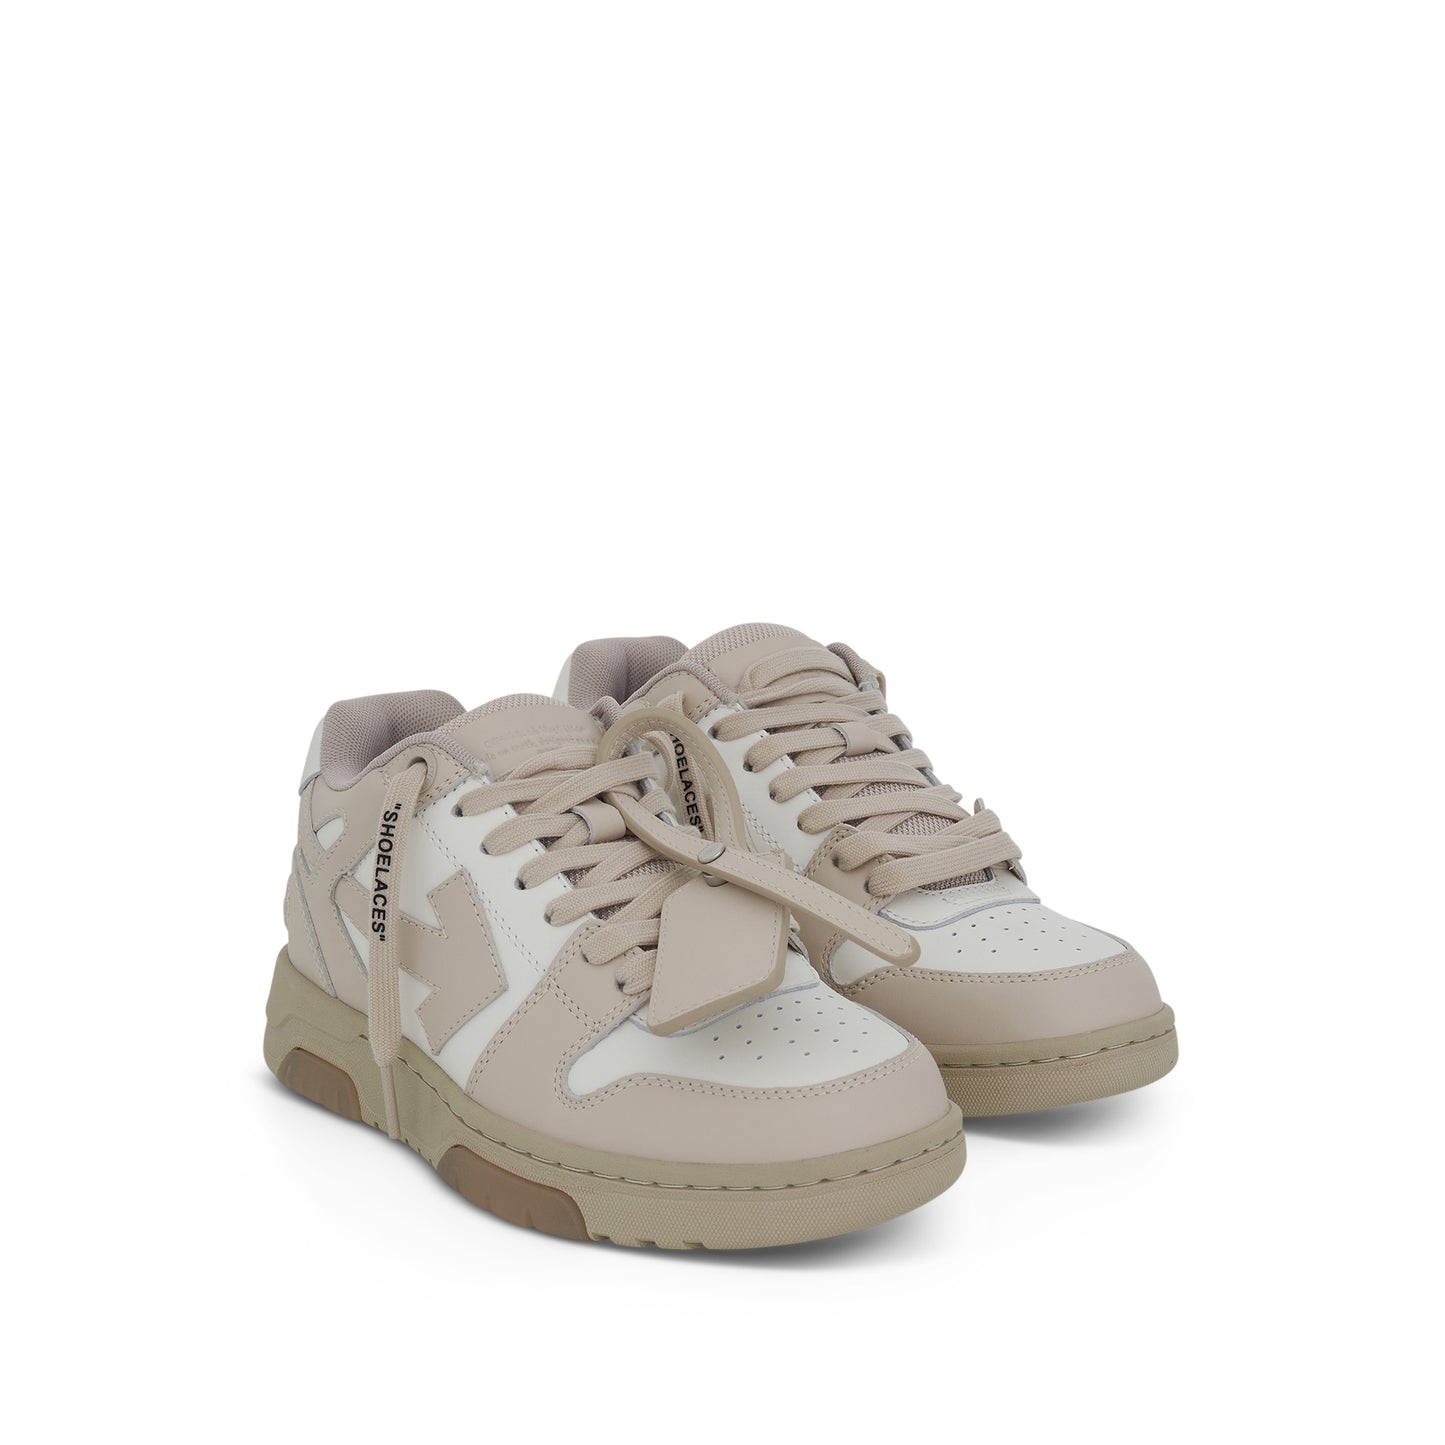 Out Of Office Sneakers in Beige/White